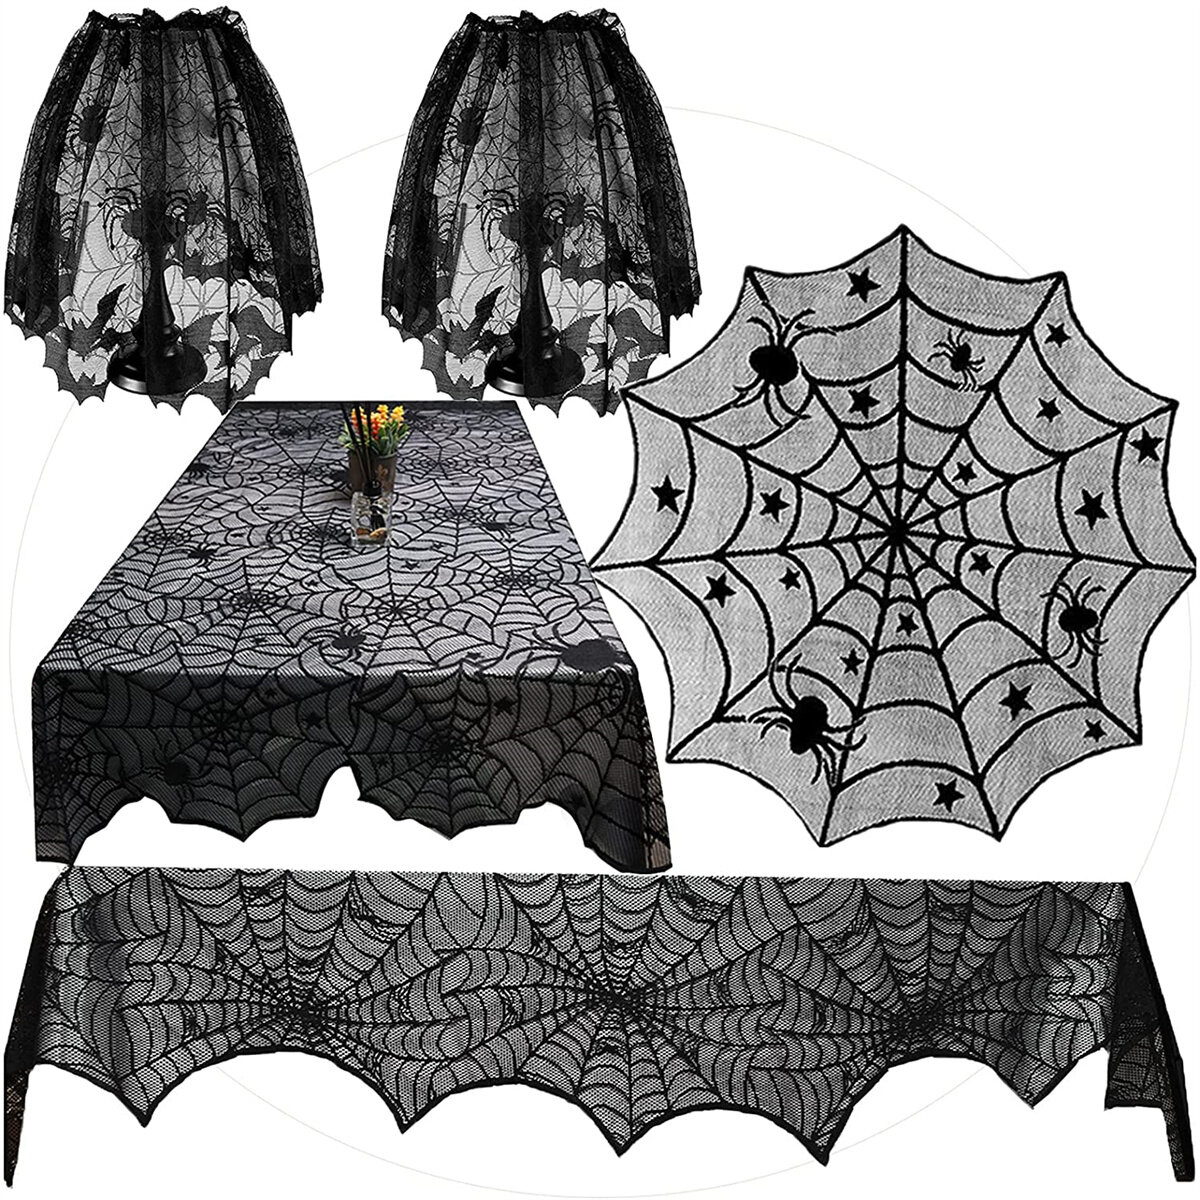 Spider Web Polyester Tablecloth Halloween Home Decor Table Cover Lace Curtain